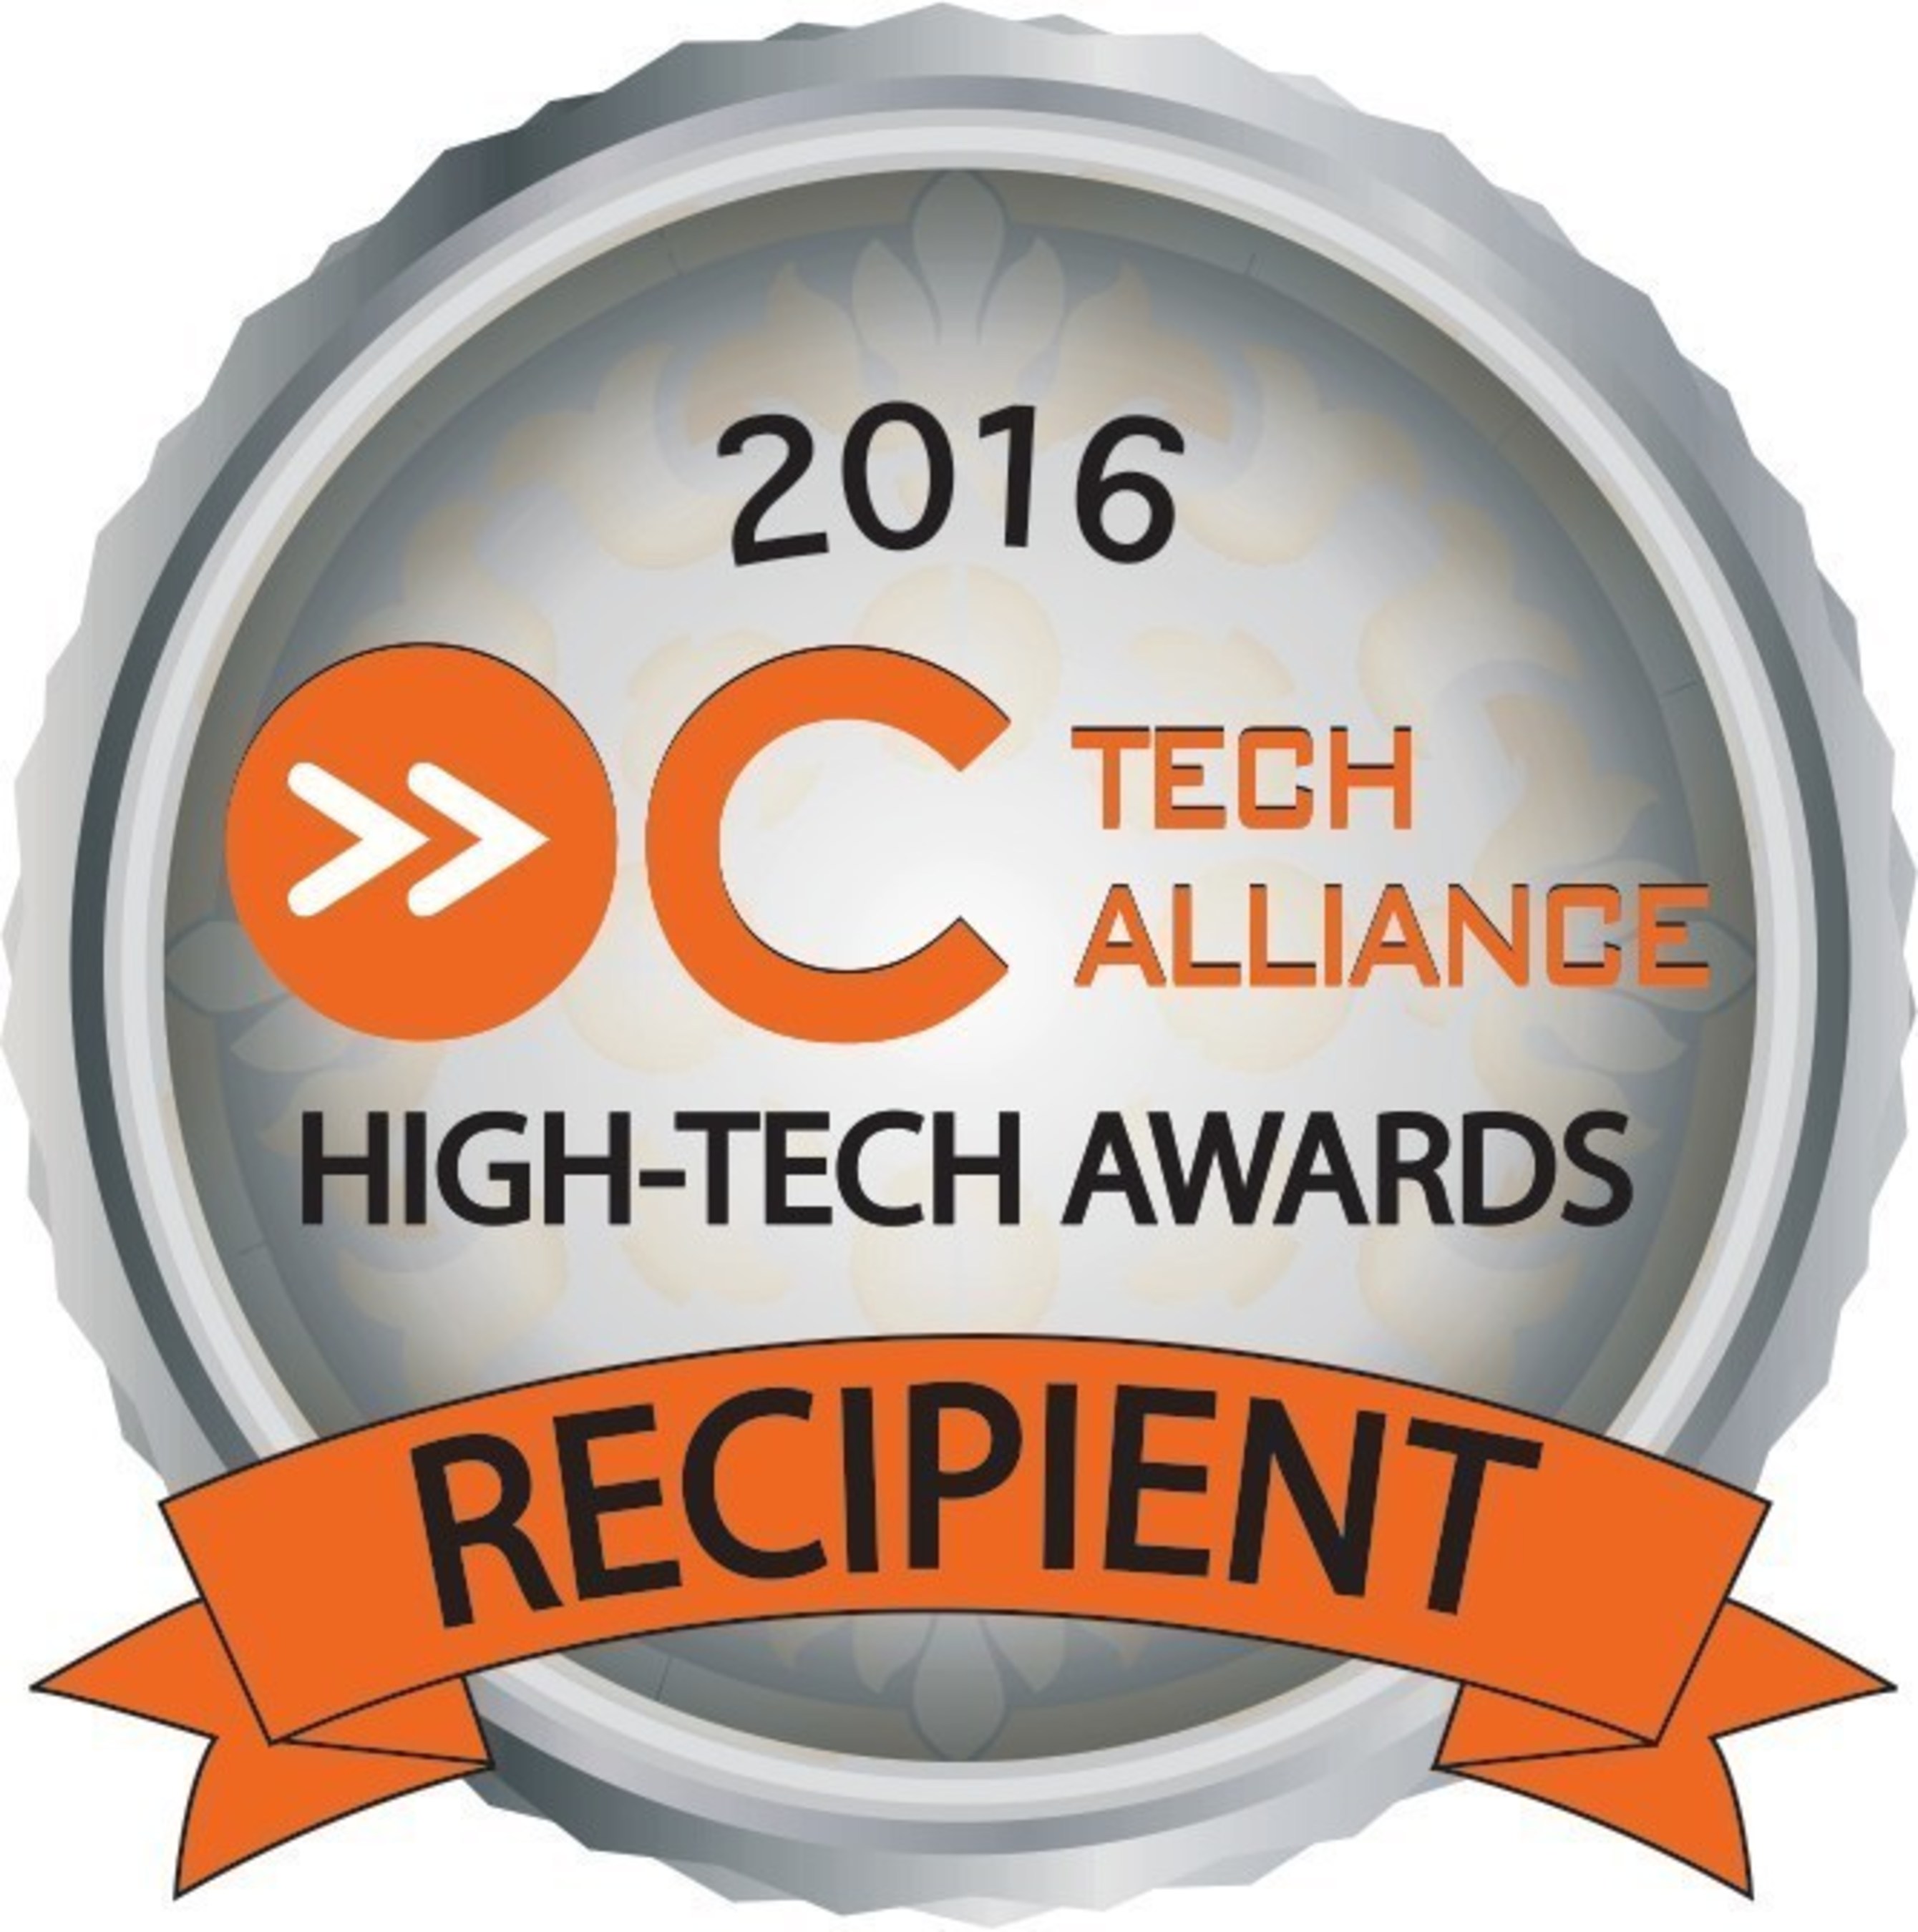 The annual High Tech Innovation Awards recognized D-Link for its technology advancement, design and innovation in the marketplace.